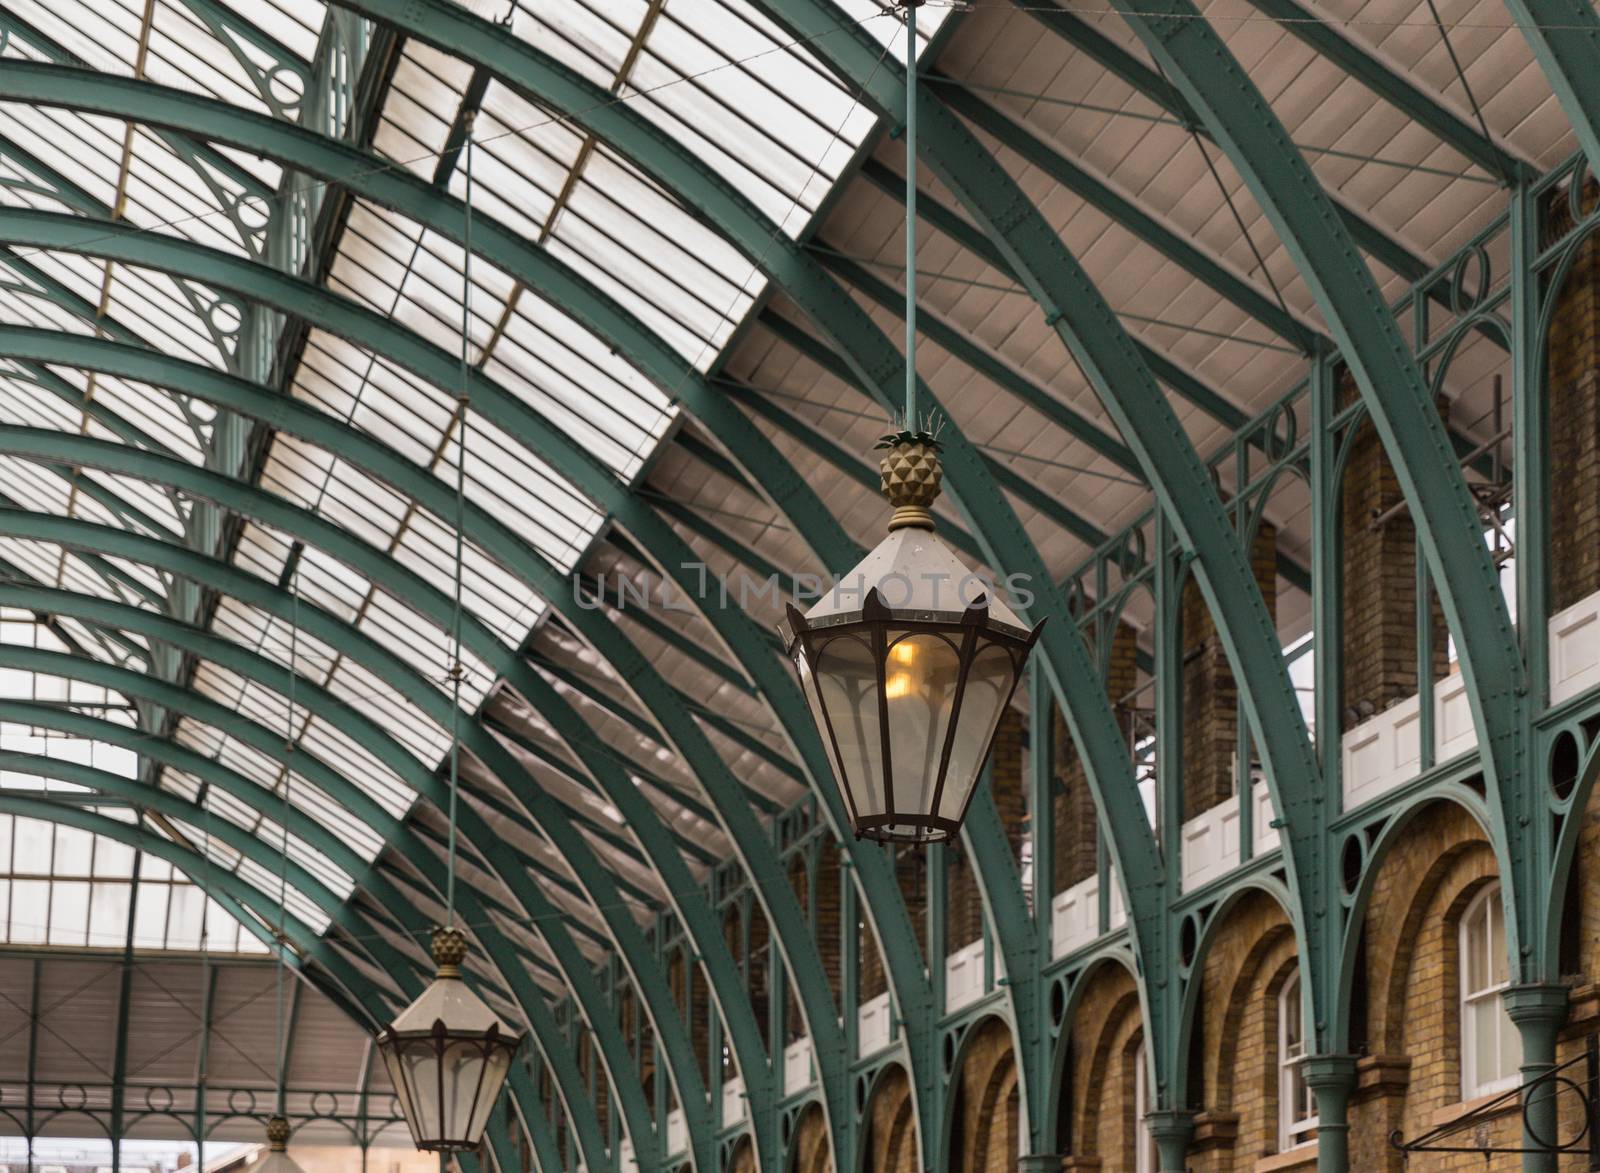 The roof and canopy of Covent Garden Market in the West End of London